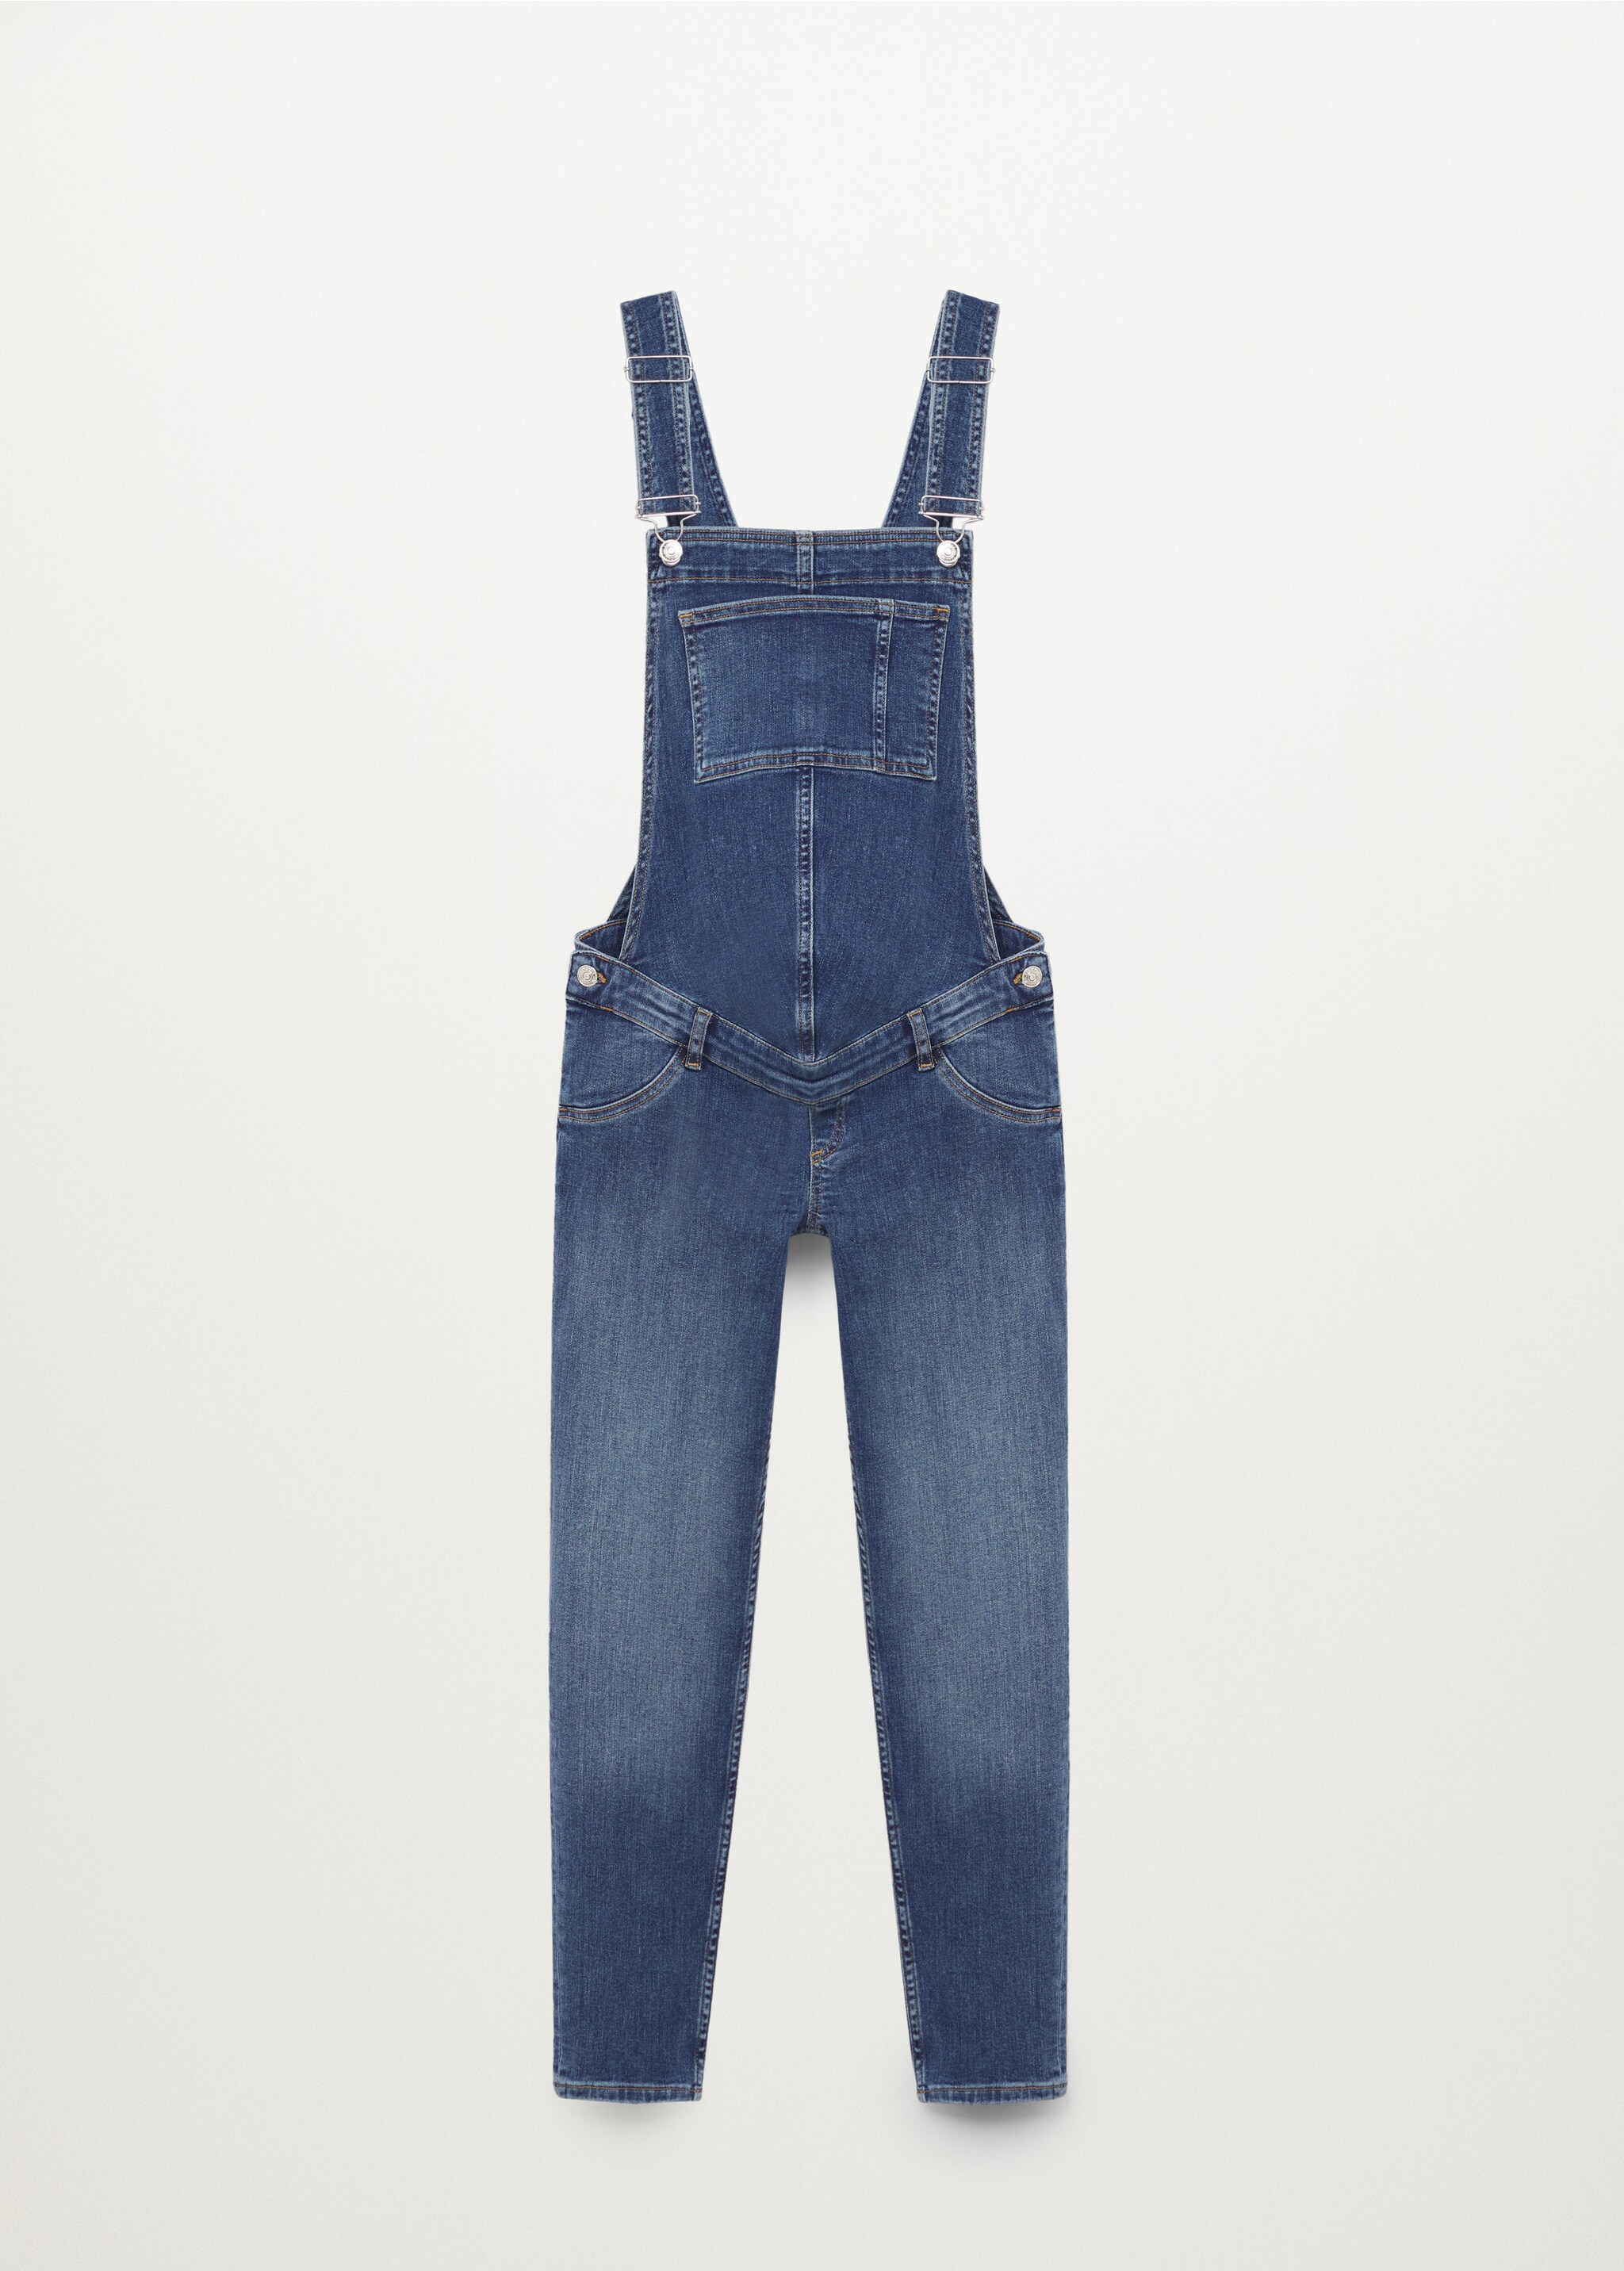 Maternity dungaree - Article without model